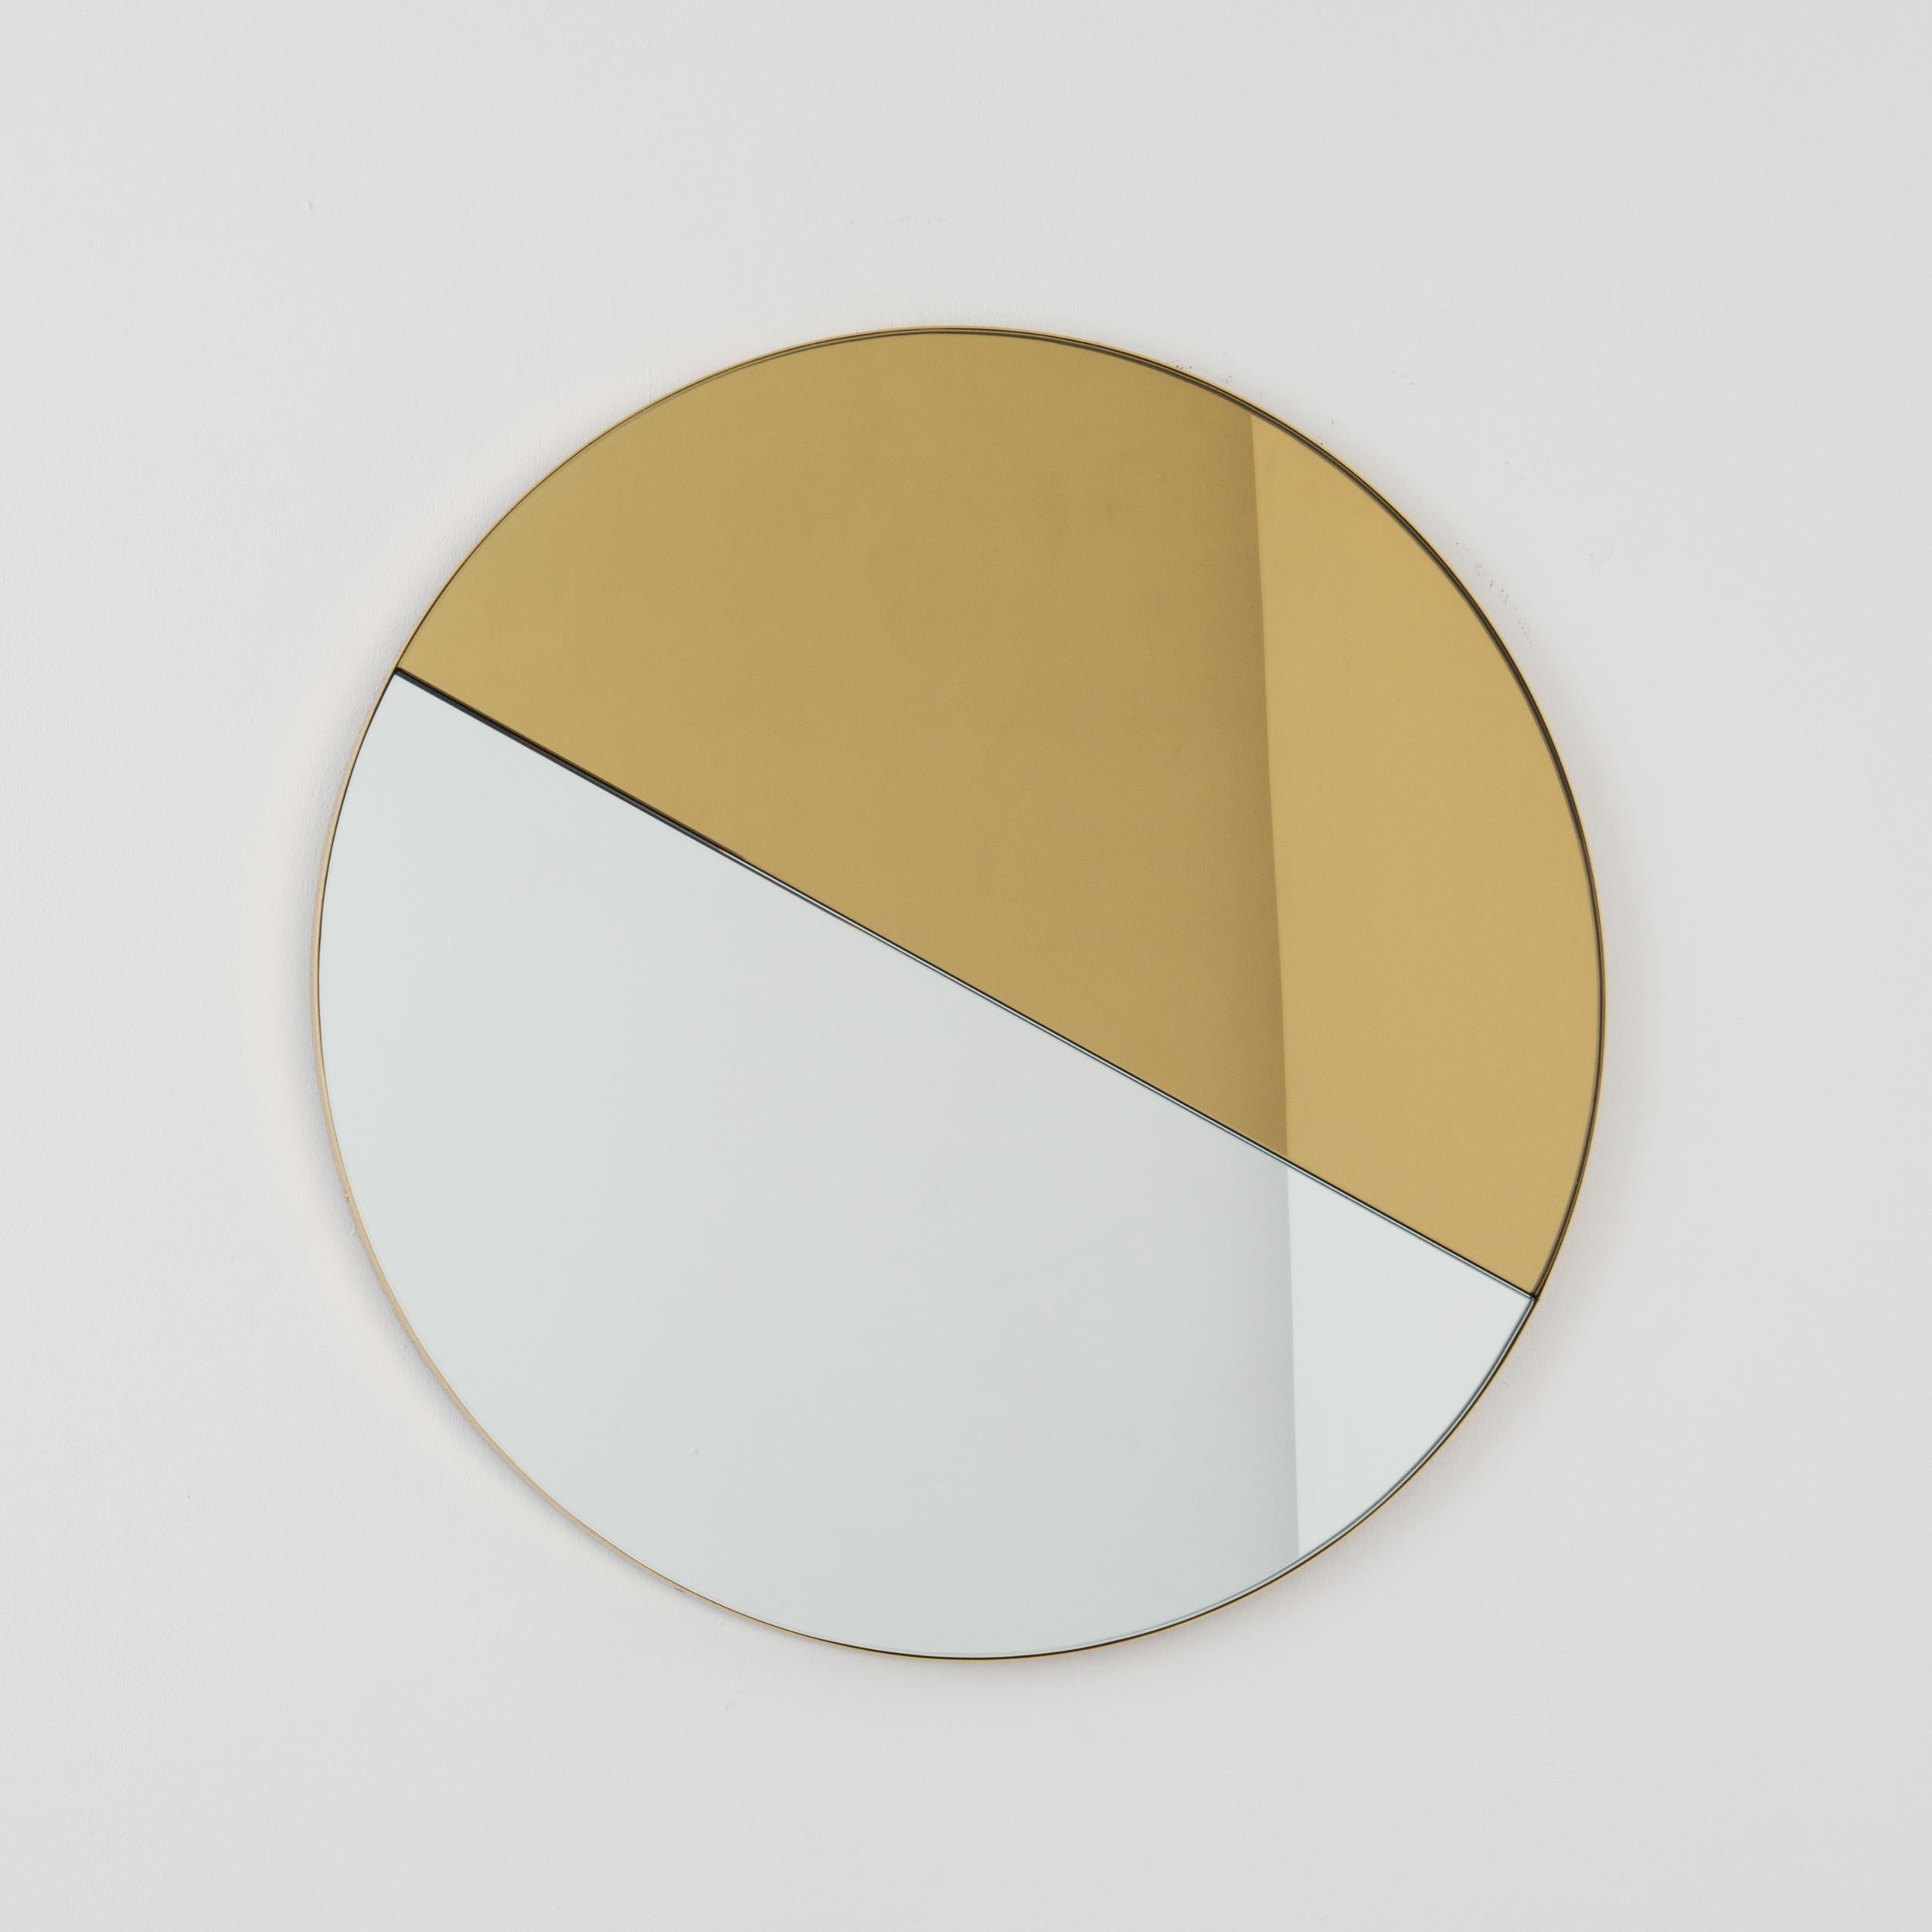 Delightful handcrafted mixed tinted gold and silver Orbis Dualis mirror with an elegant solid brushed brass frame. Supplied fully fitted with a specialist hanging system that allows the mirror to be hung in four different positions. Designed and